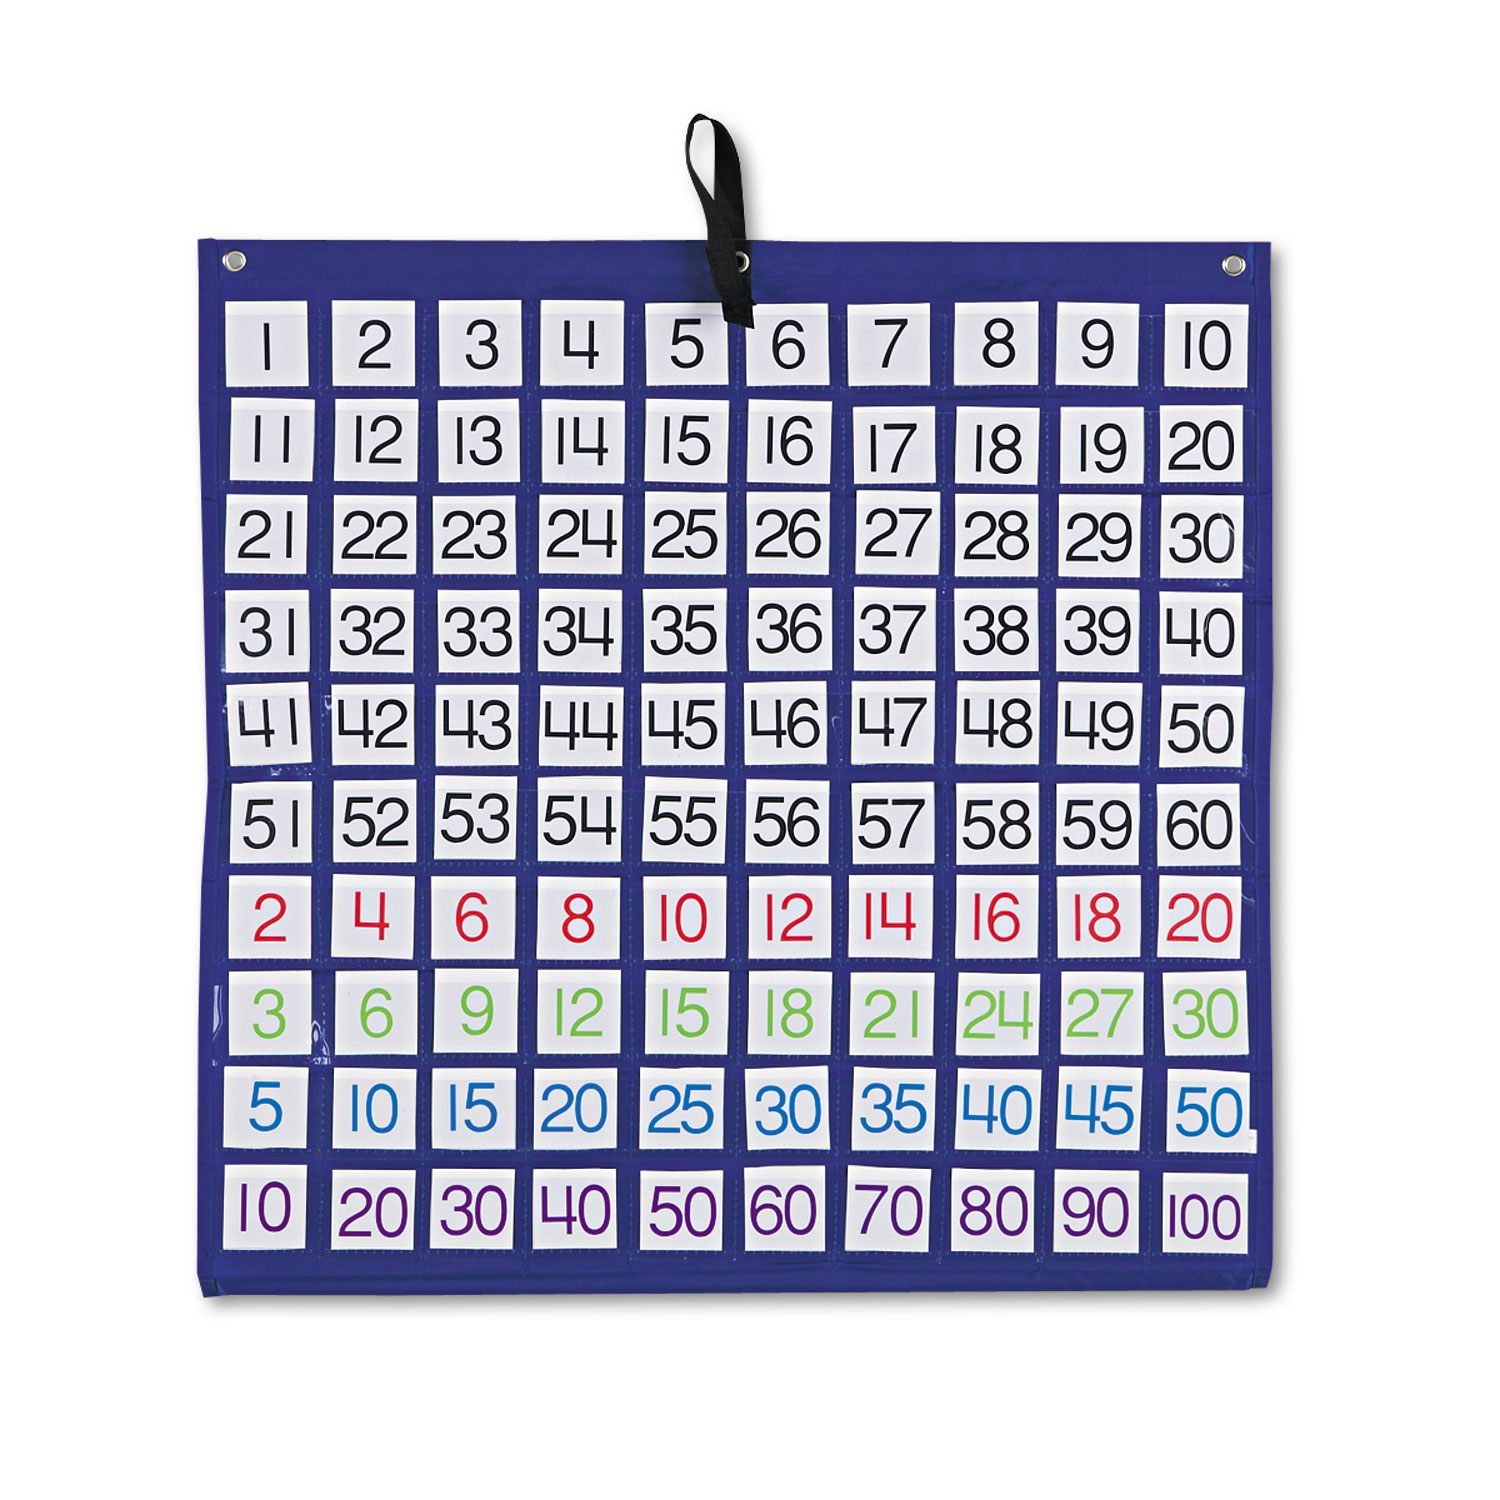 Hundreds Pocket Chart with 100 Clear Pockets, Colored Number Cards, 26 x 26